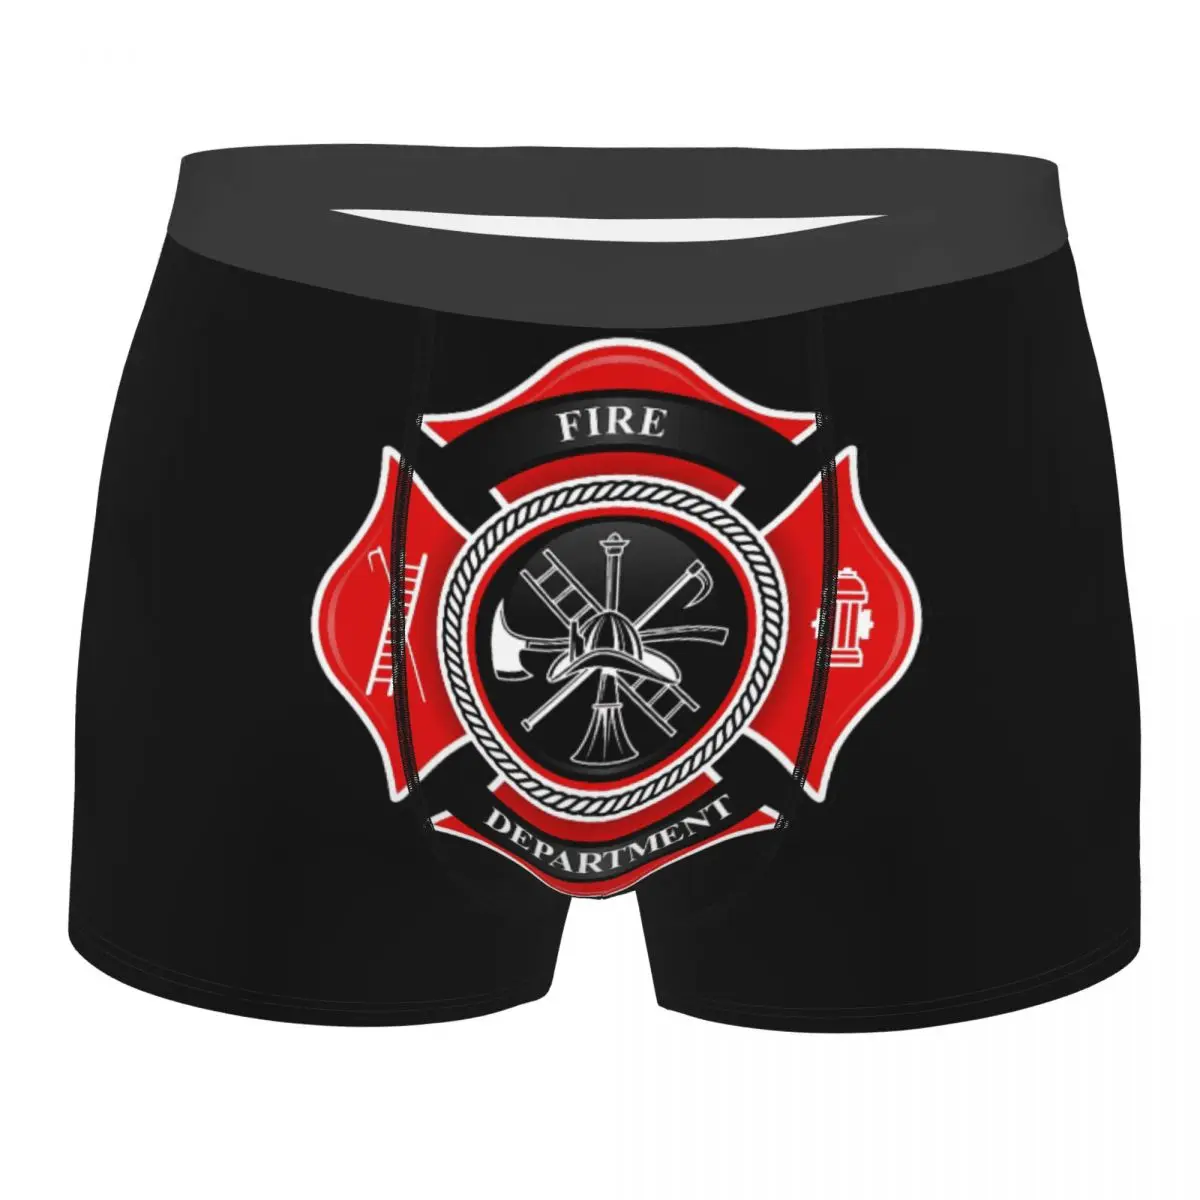 Fire Department Badge firefighter Men's Boxer Briefs special Highly Breathable Underpants High Quality 3D Print Shorts takara tomy tomica special vehicle 128 naha fire department hyper mist blower car model truck miniature toy for boy